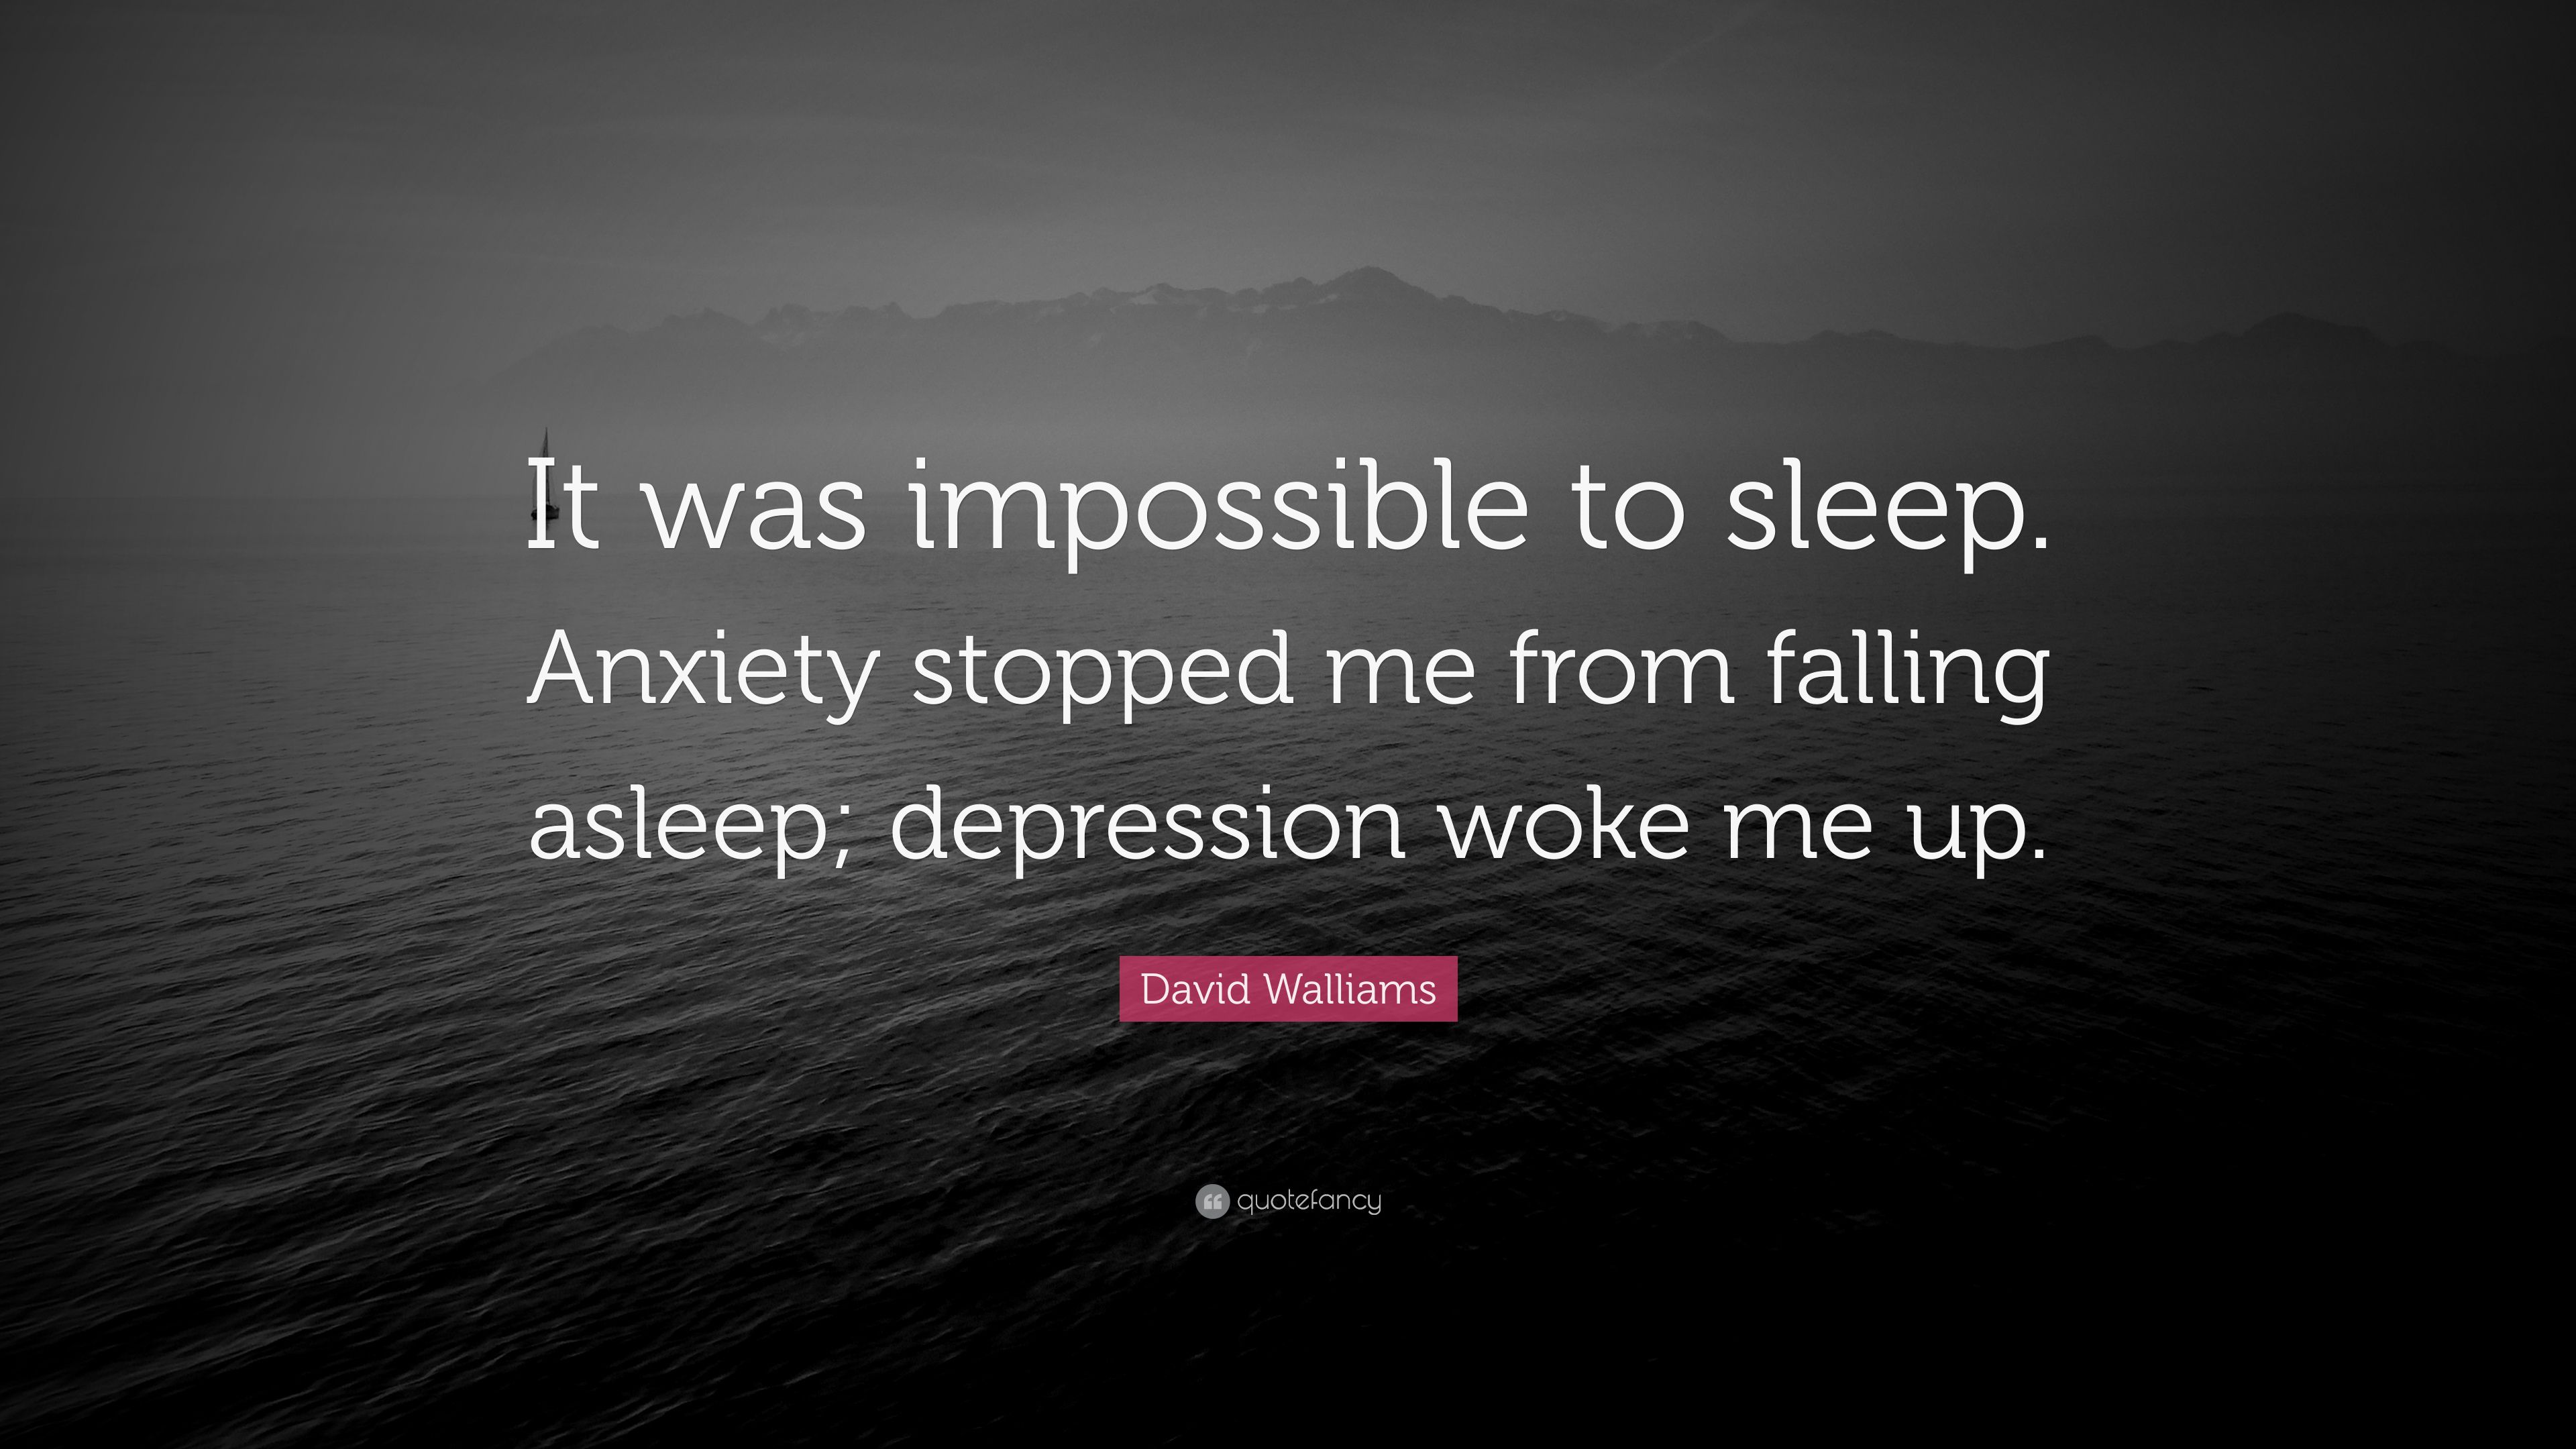 David Walliams Quote: “It was impossible to sleep. Anxiety stopped me from falling asleep; depression woke me up.” (7 wallpaper)